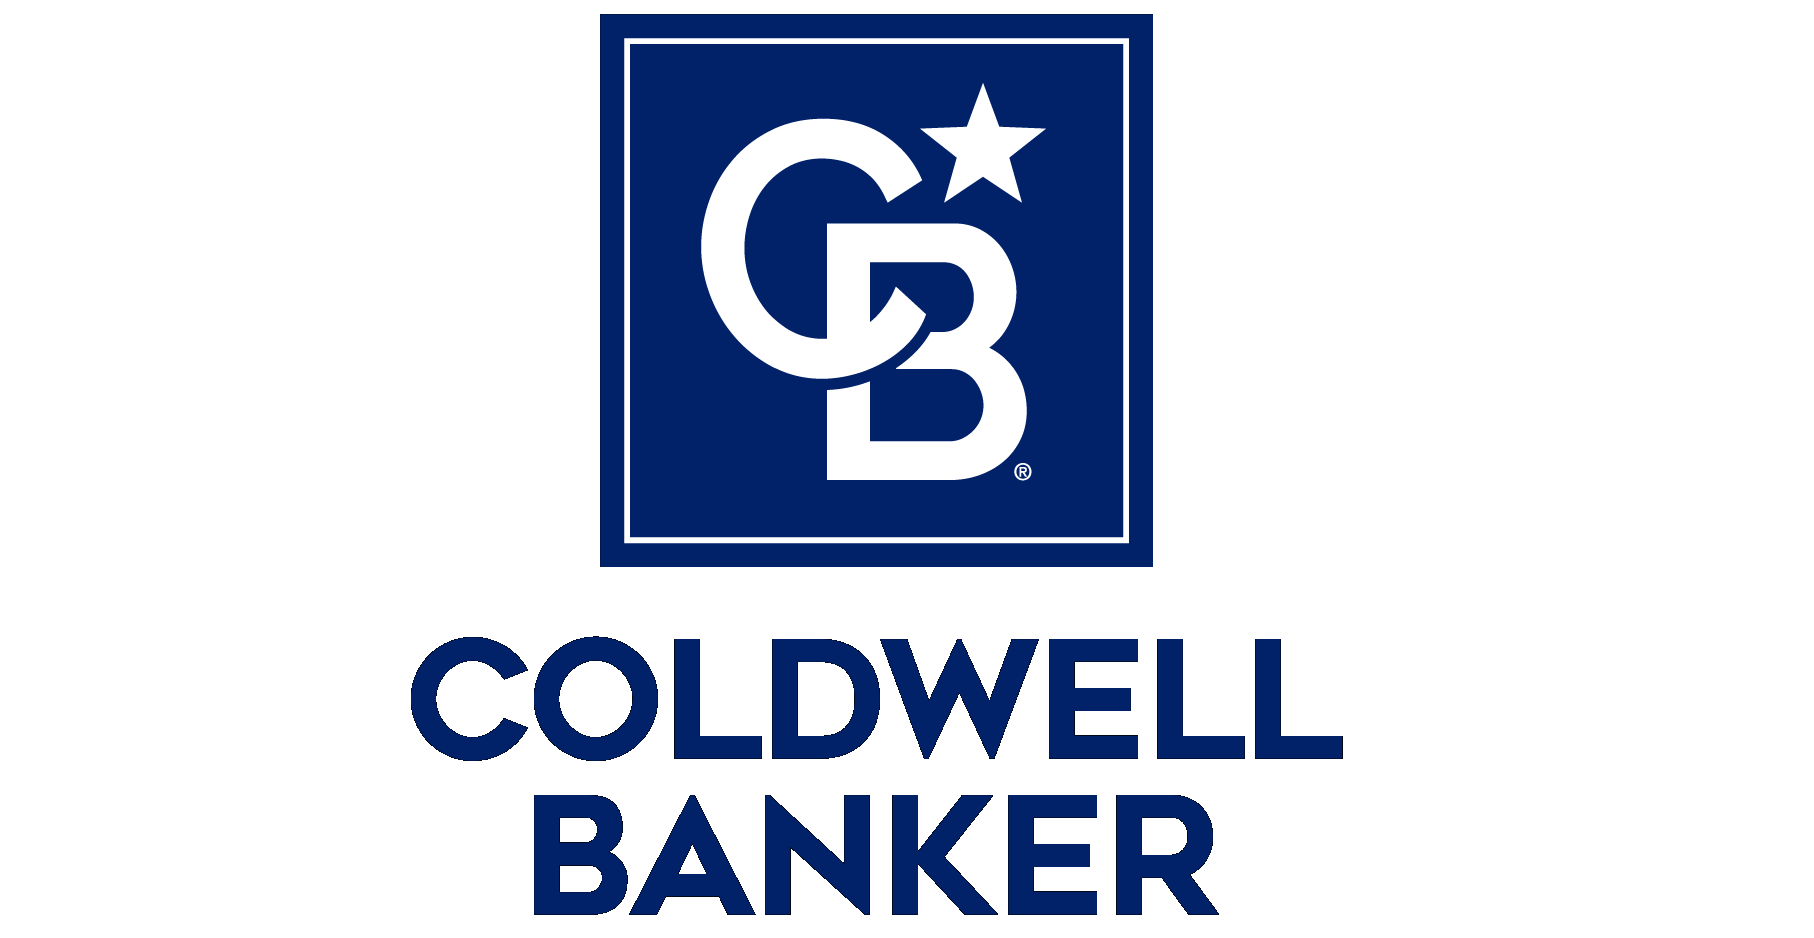 Click here to learn more about Coldwell Banker